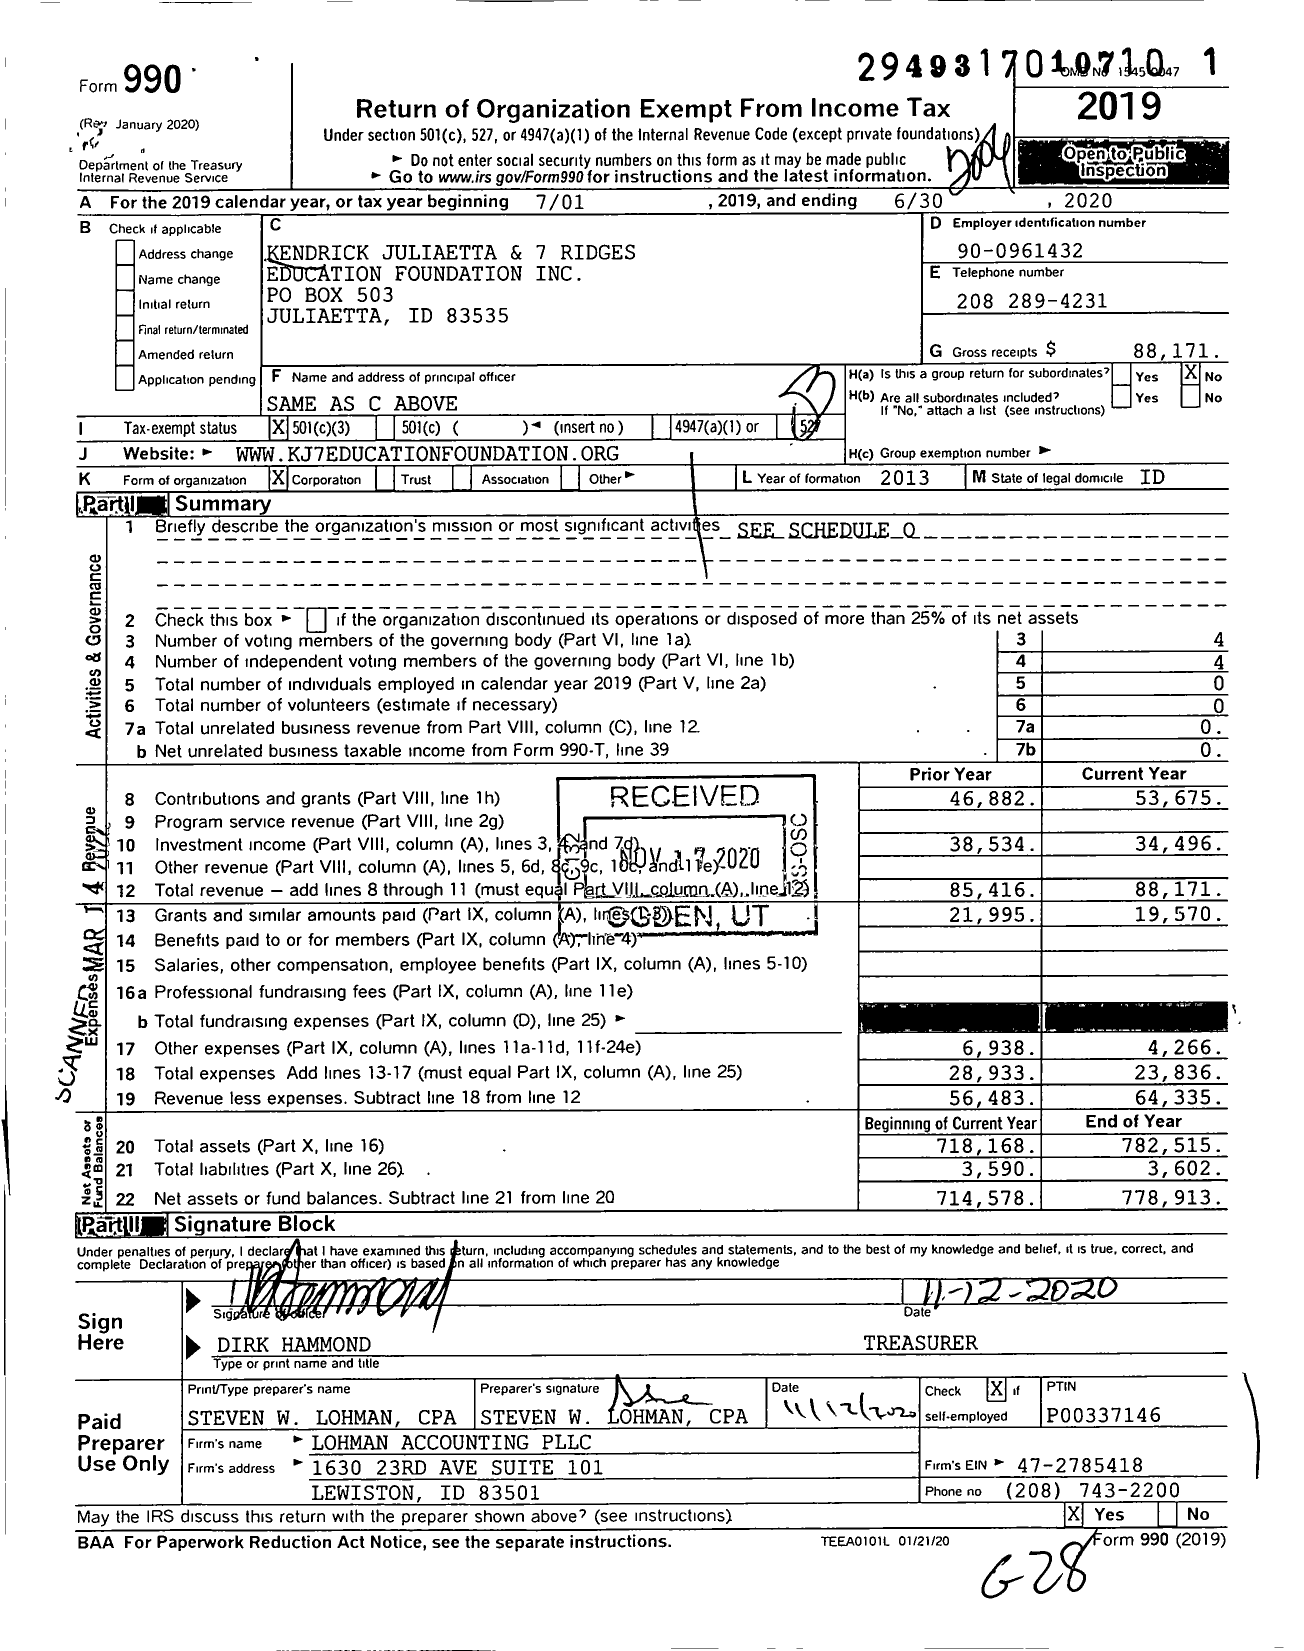 Image of first page of 2019 Form 990 for Kendrick Juliaetta and 7 Ridges Education Foundation